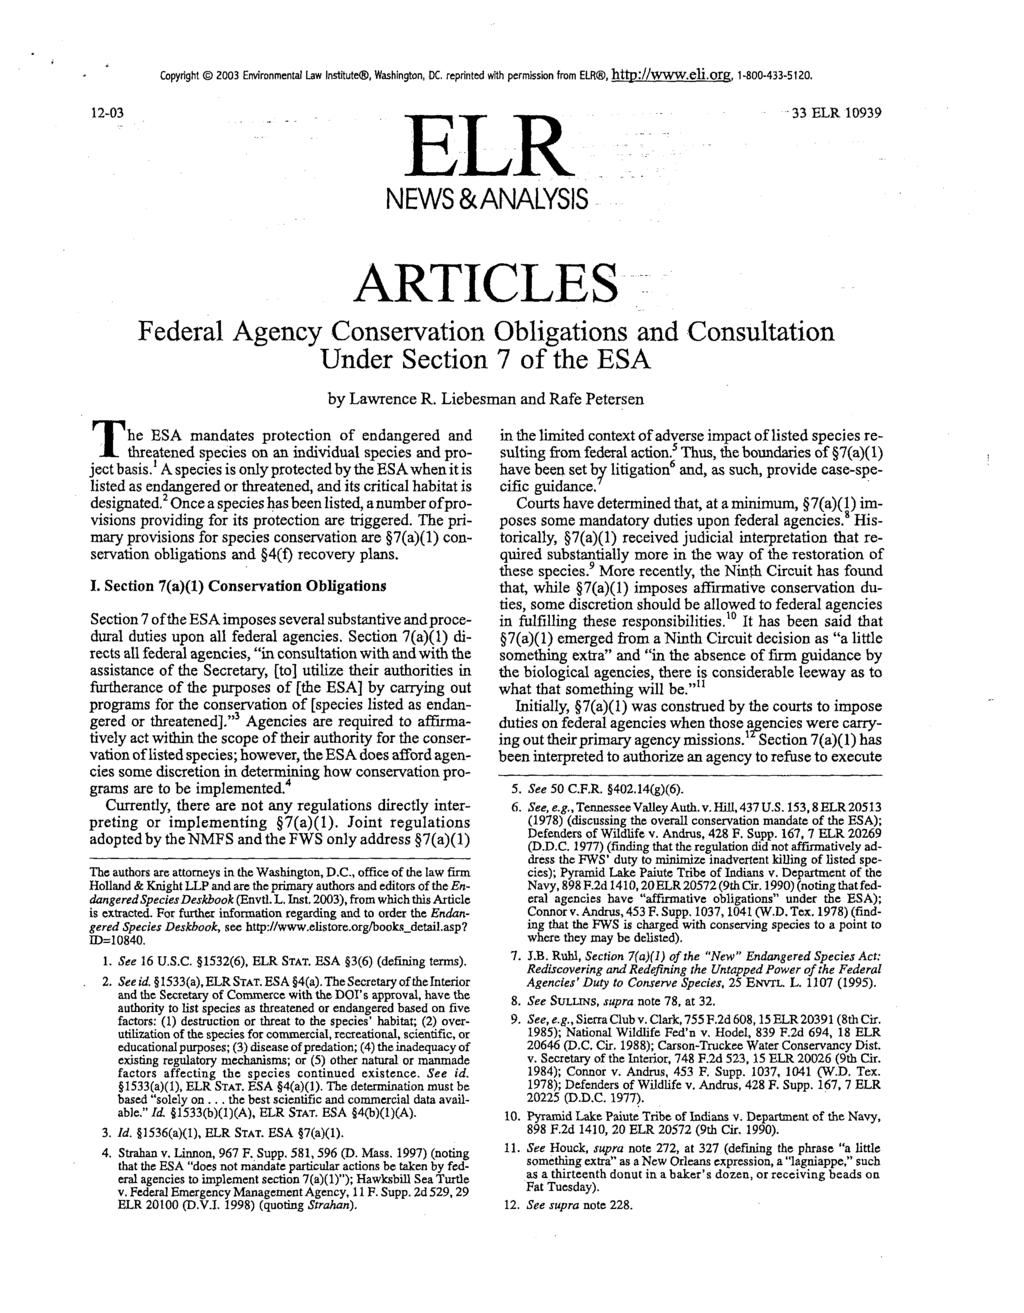 12-03 Copyright 2003 Environmental Law Institute, Washington, DC. reprinted with permission from ELR, http.'//www.eli.org, 1-800-433-5120.